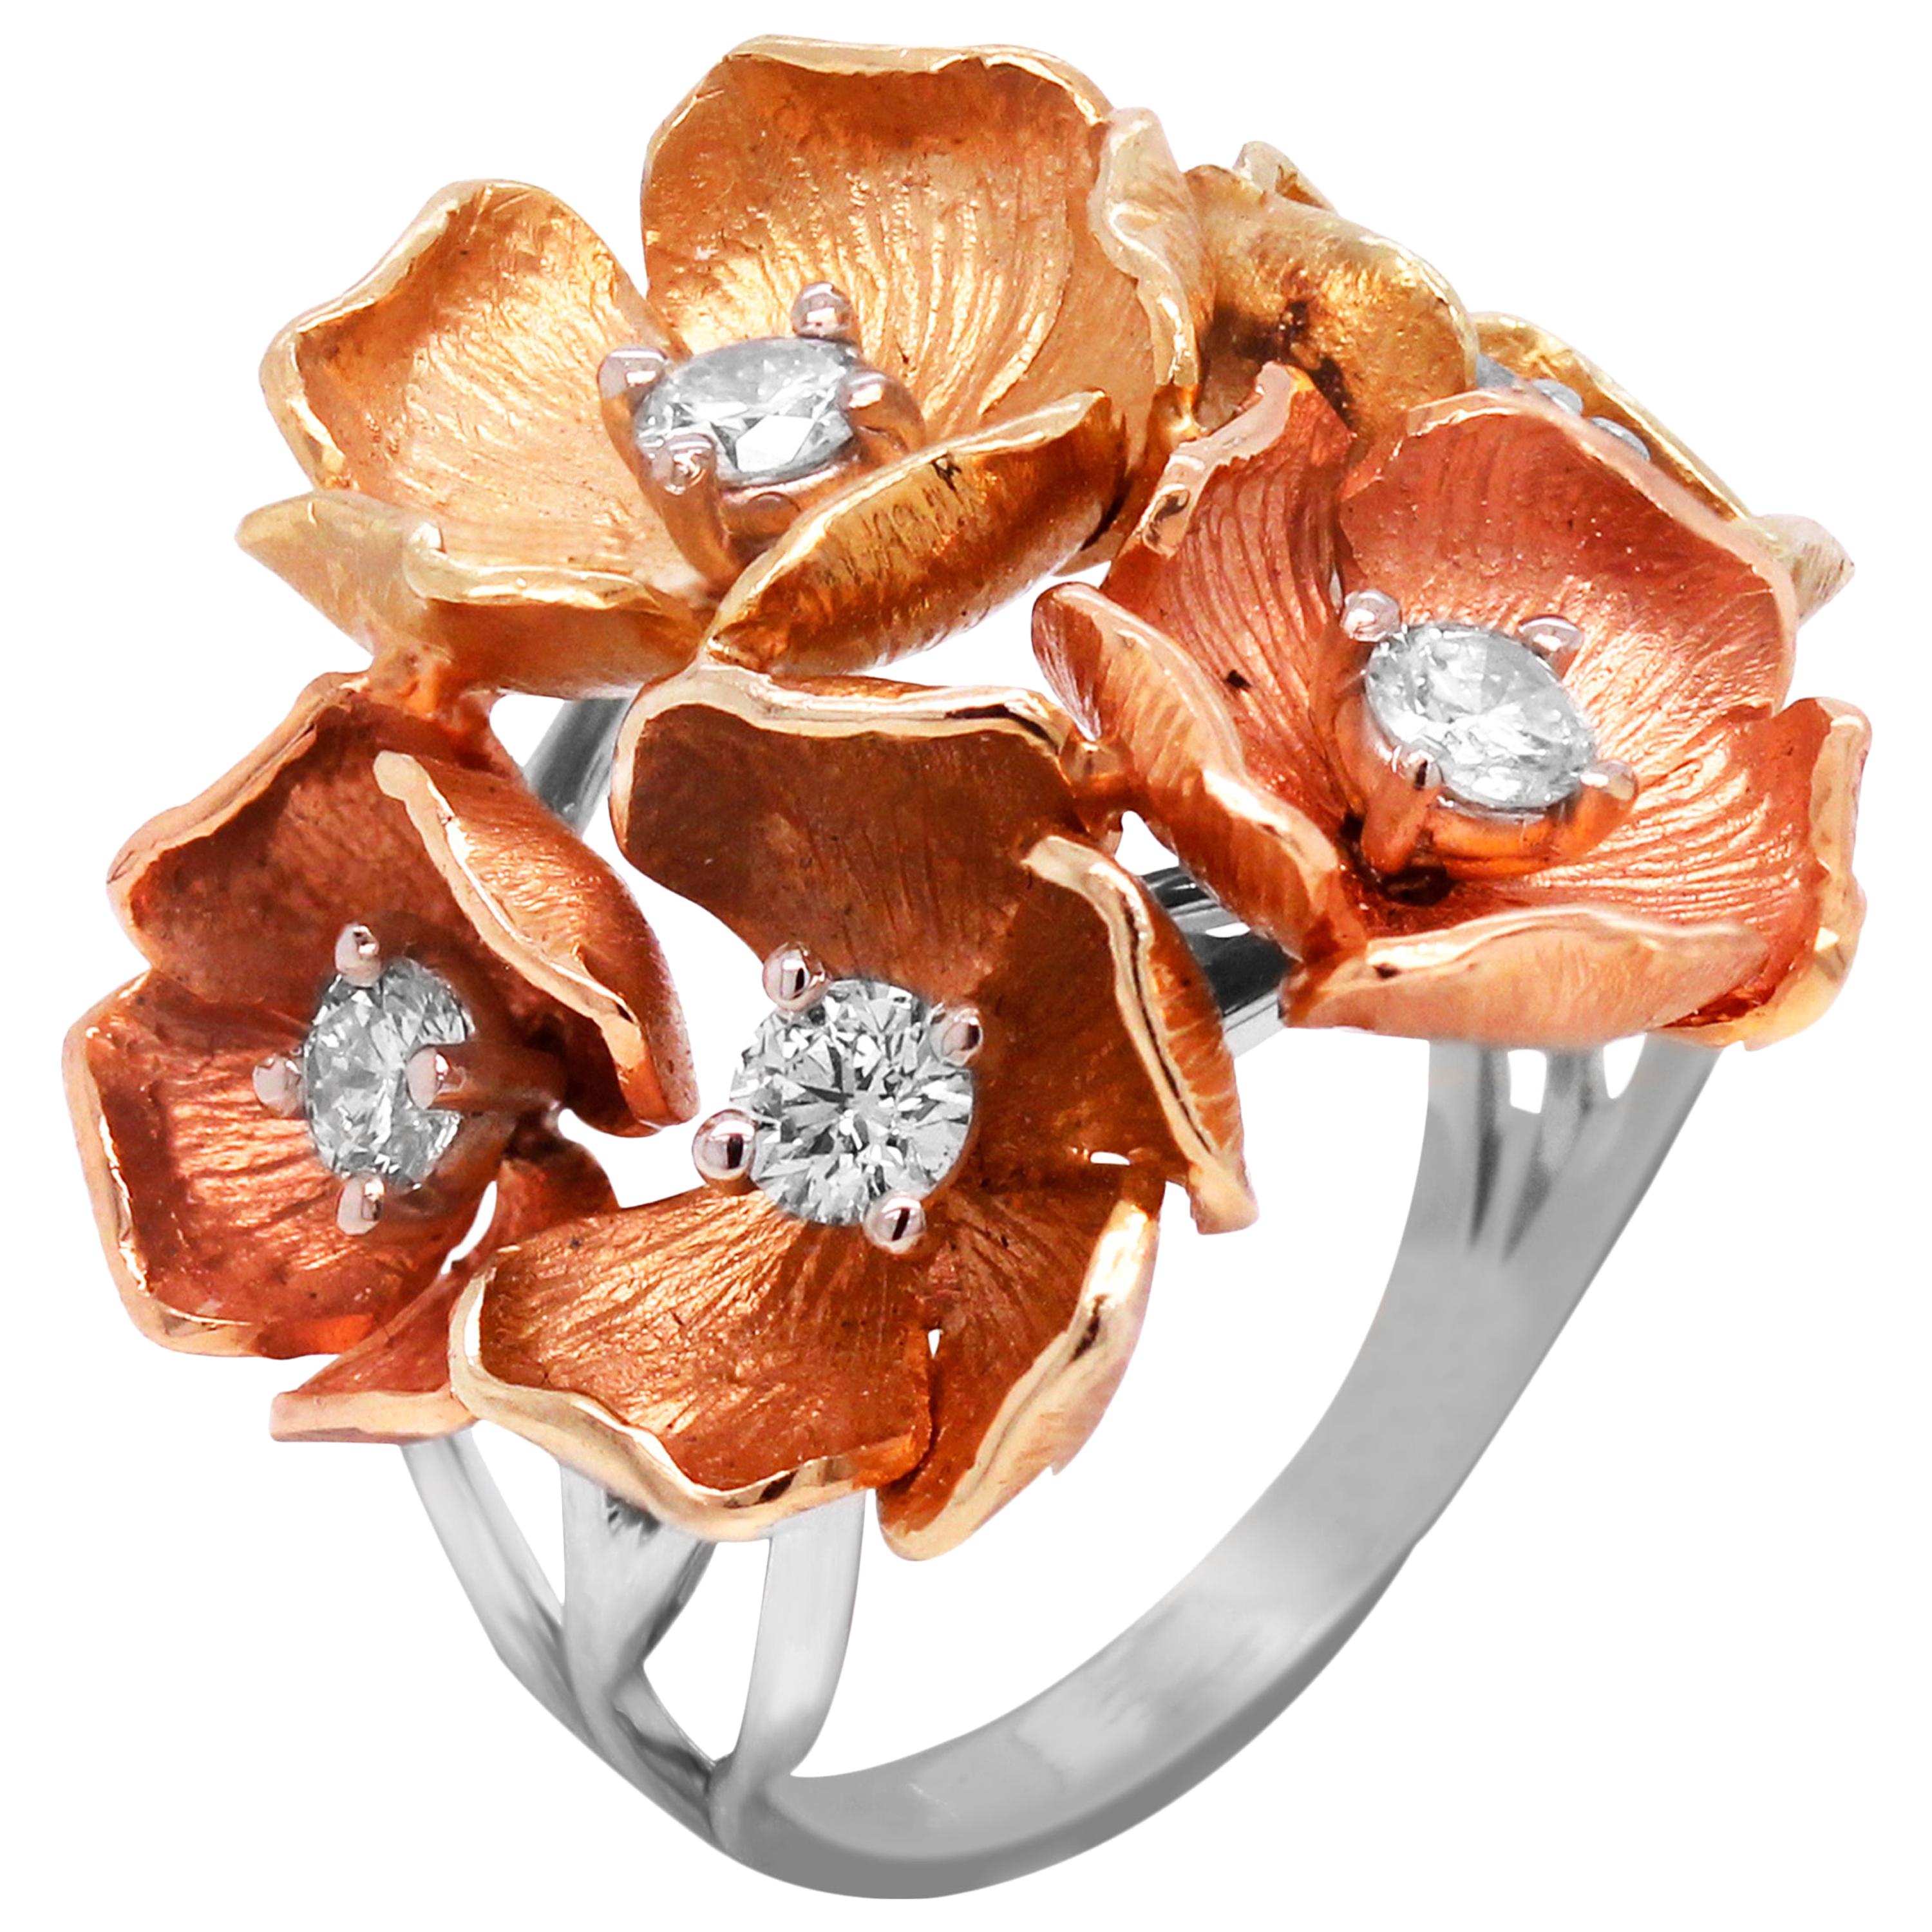 J 1/2 R010 > Lovely 9ct SOLID ROSE Gold Flower Blossoms & Leaves Ring size 5 